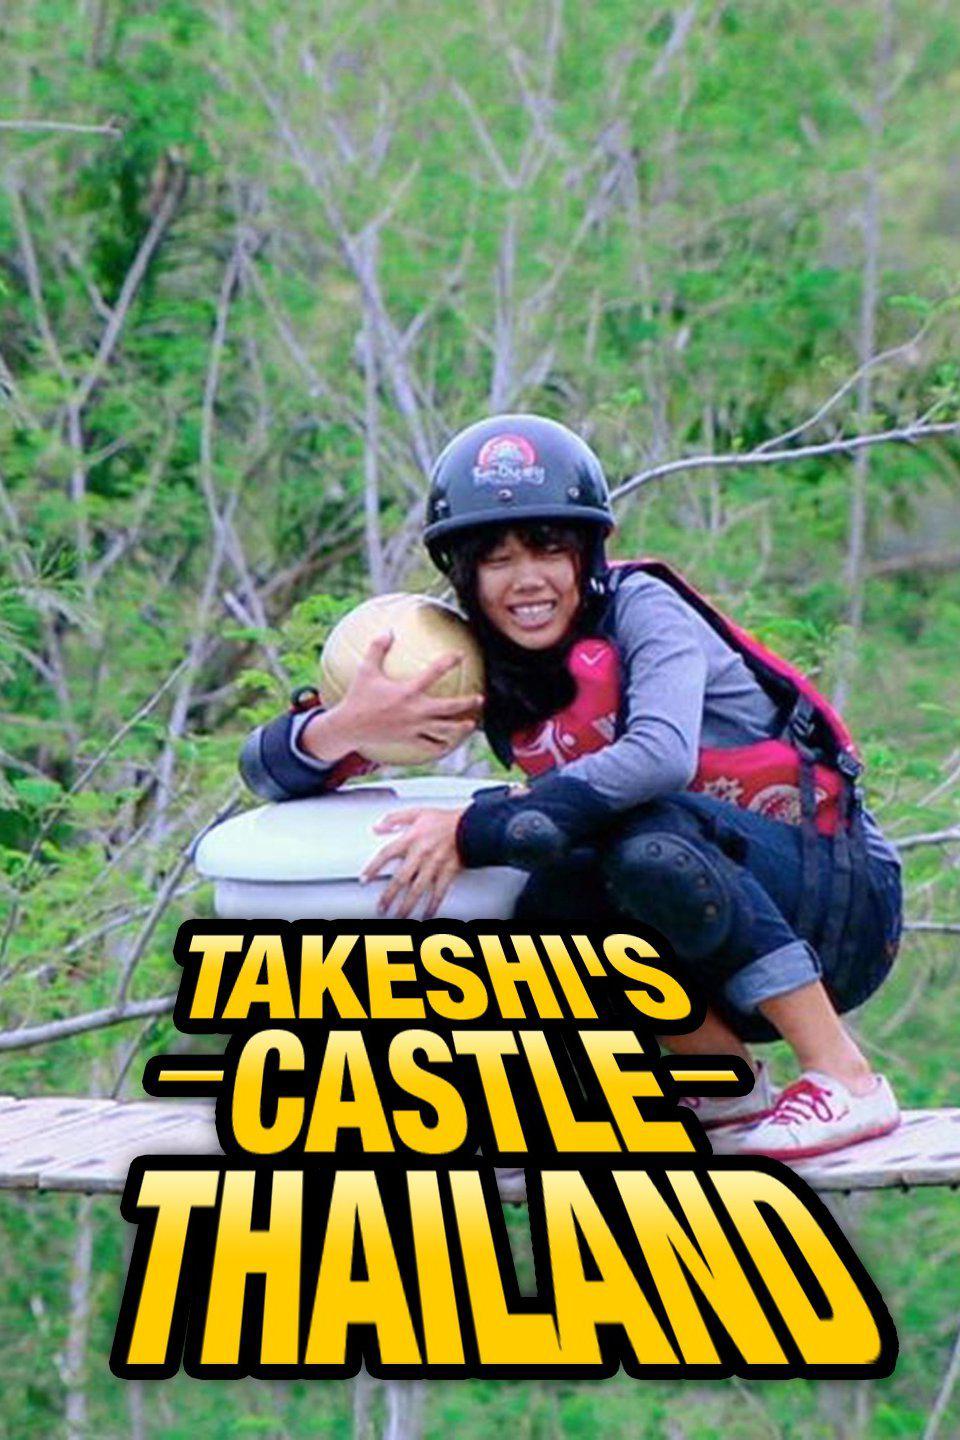 TV ratings for Takeshi's Castle Thailand in Mexico. Challenge TV TV series